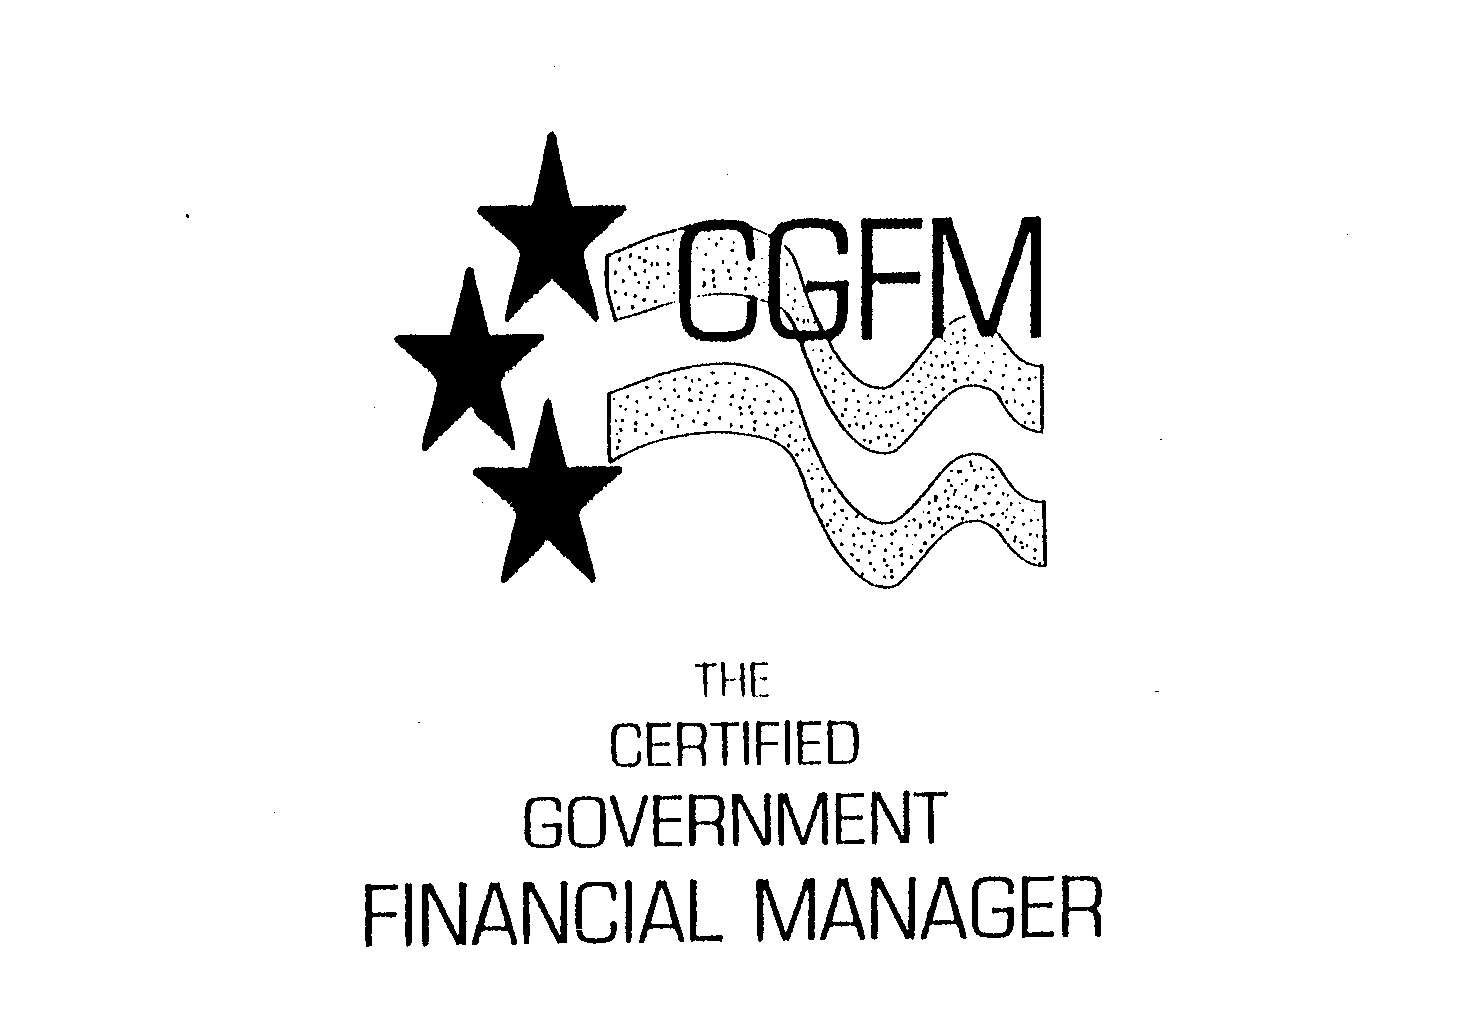  CGFM THE CERTIFIED GOVERNMENT FINANCIAL MANAGER